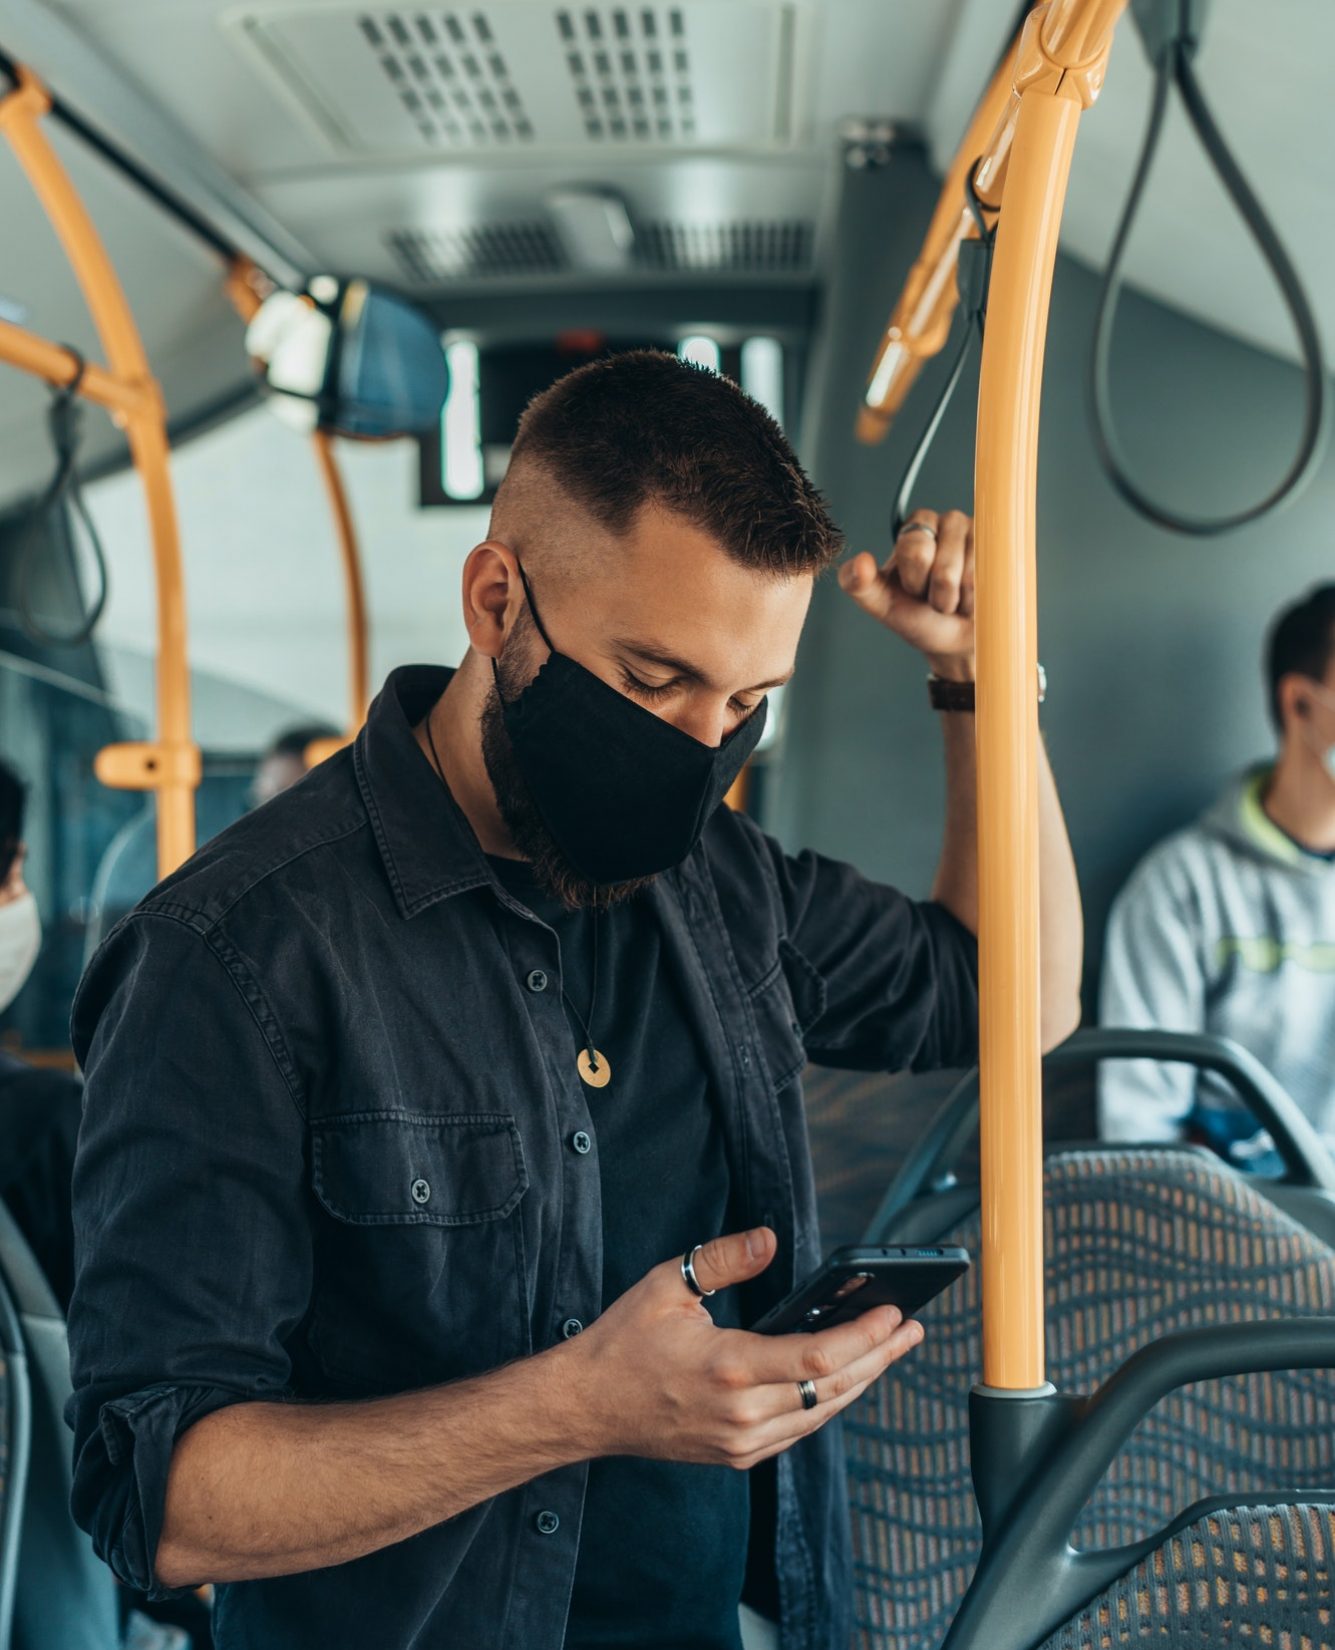 man-wearing-a-protective-mask-and-using-a-smartphone-while-keeping-the-distance-in-the-bus.jpg